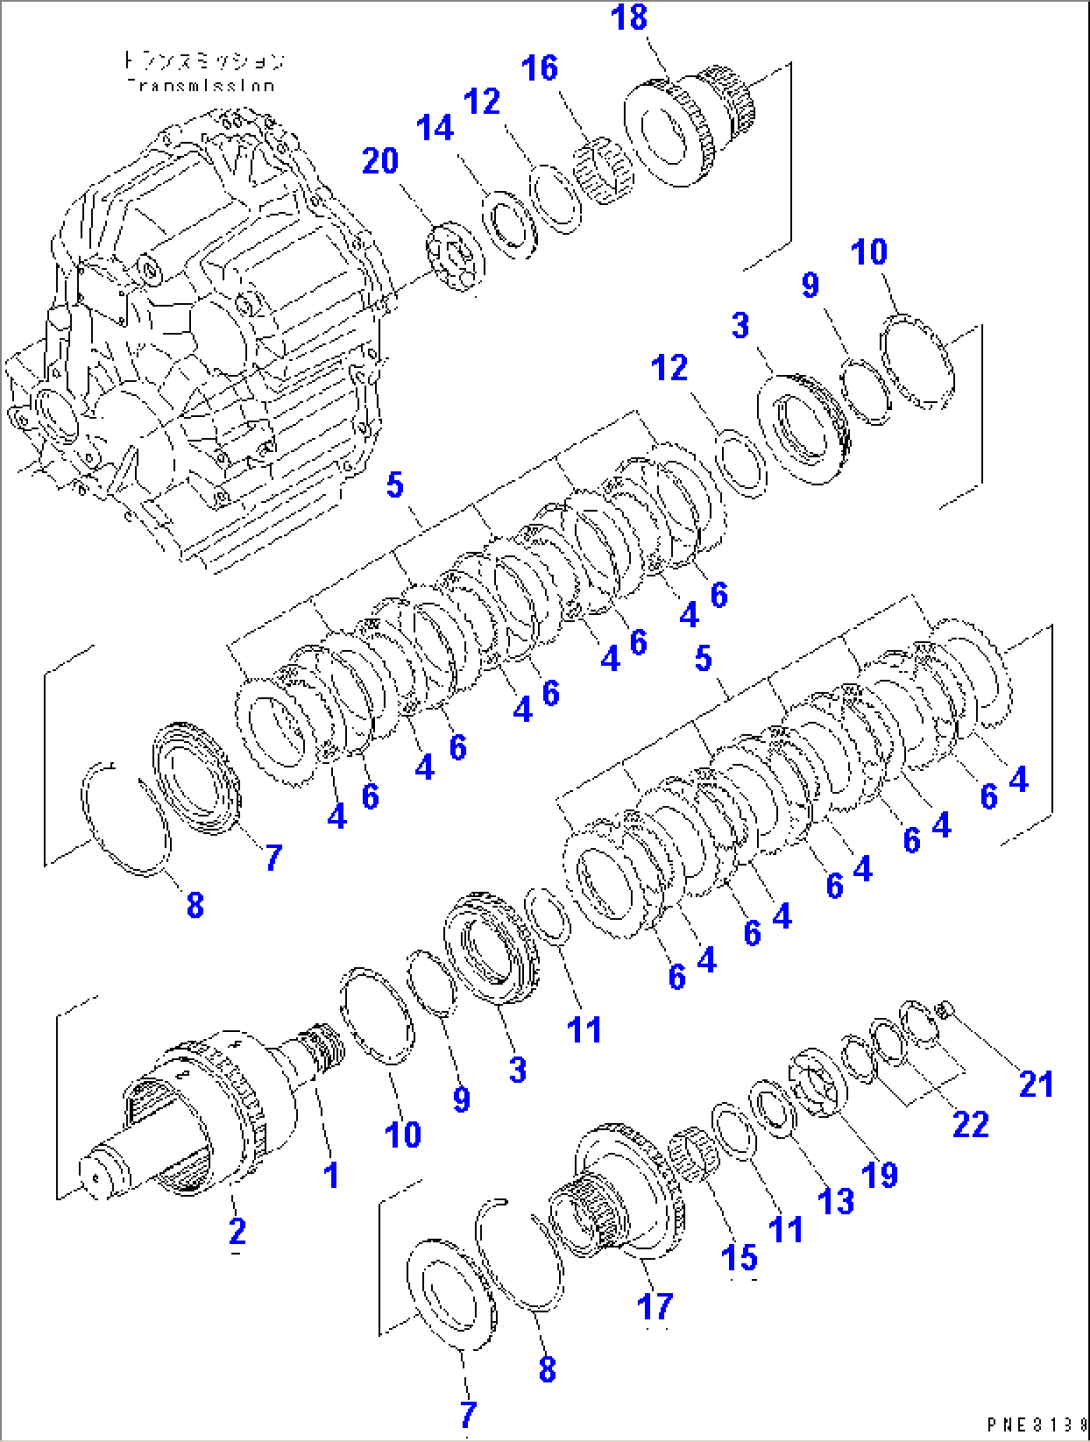 TRANSMISSION (3RD AND 4TH CLUTCH)